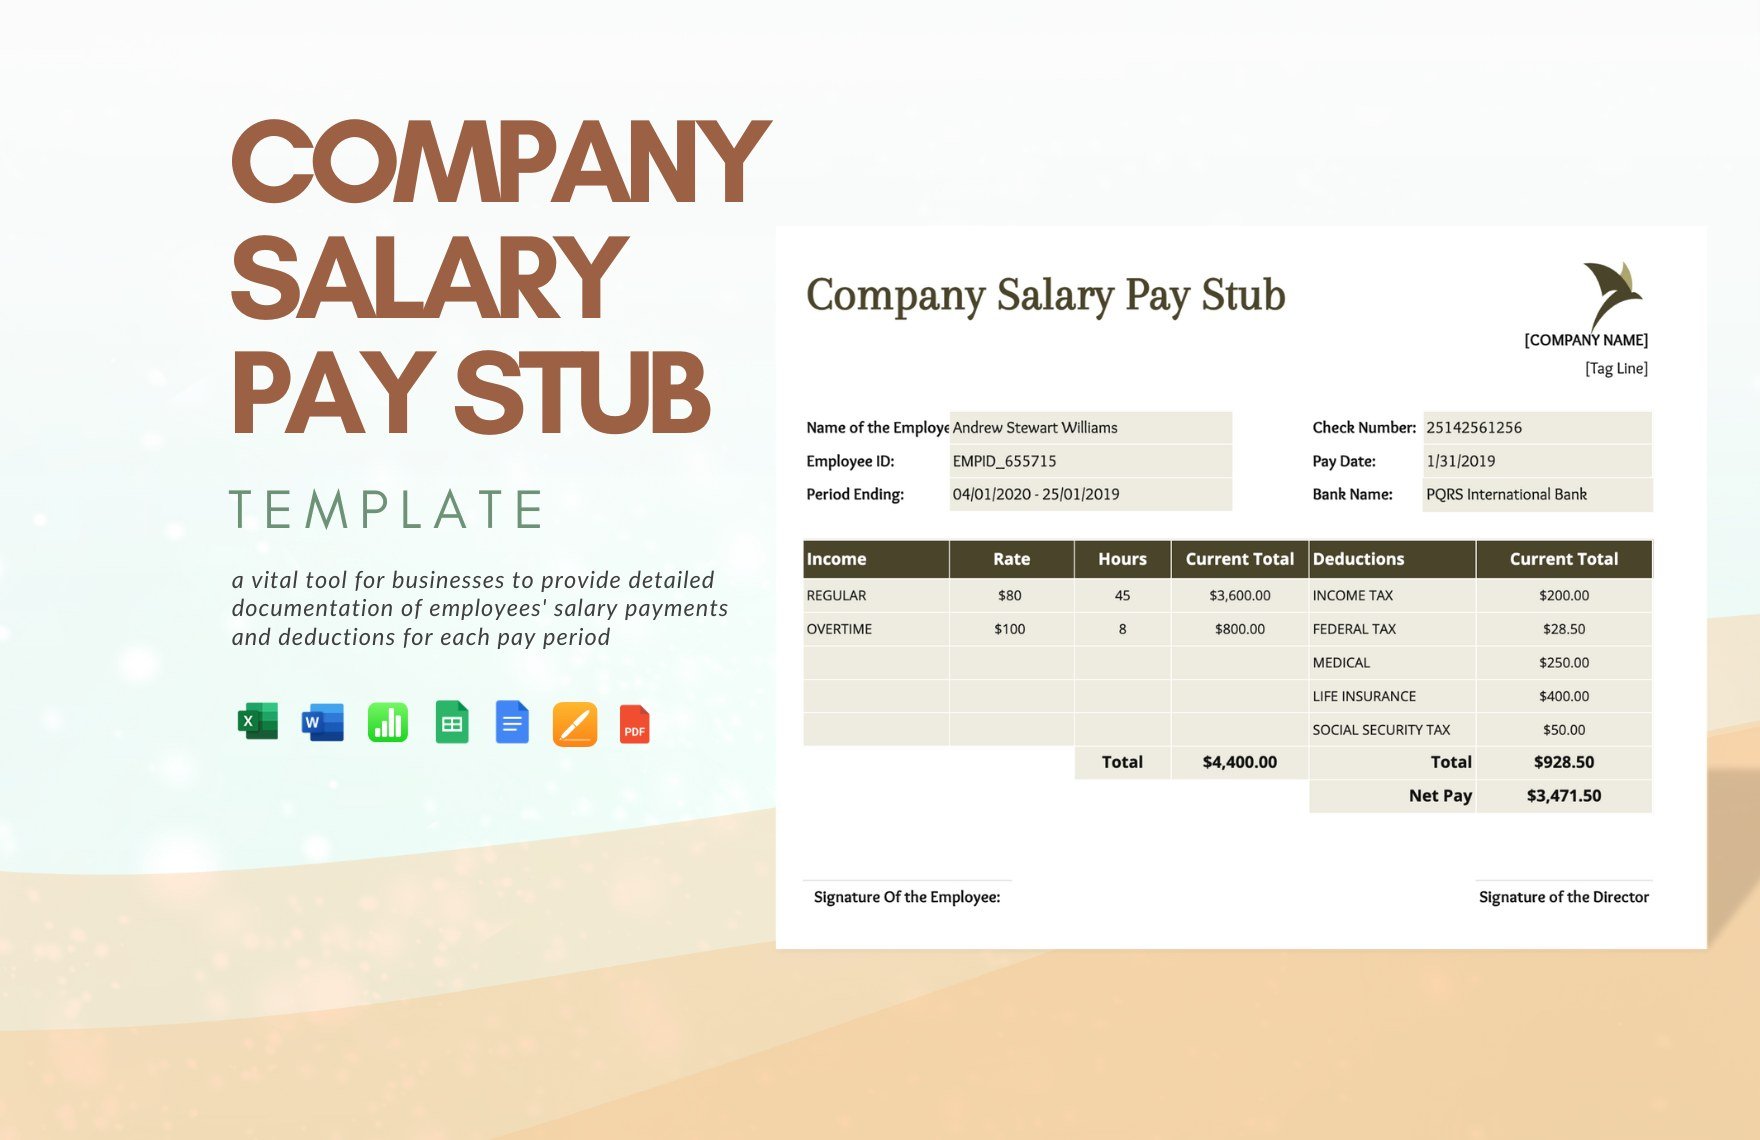 Company Salary Pay Stub Template in Word, Google Docs, Excel, PDF, Google Sheets, Apple Pages, Apple Numbers